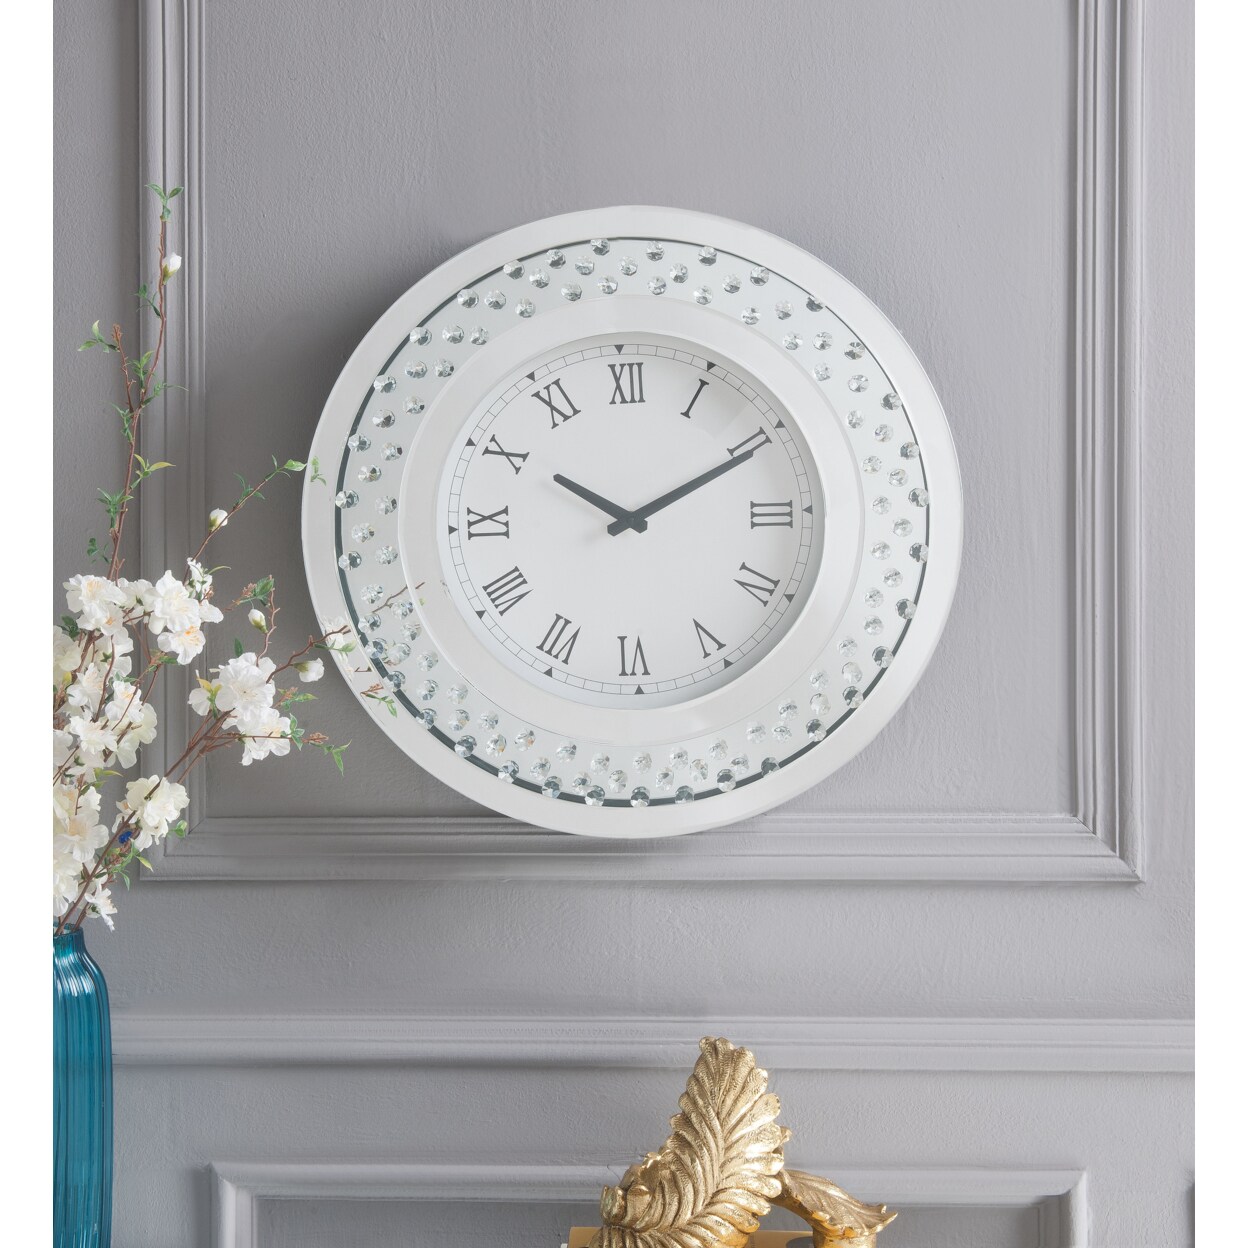 ACME 20 Inch Analog Wall Clock, Round Mirror Frame, Faux Crystals Inlay, White